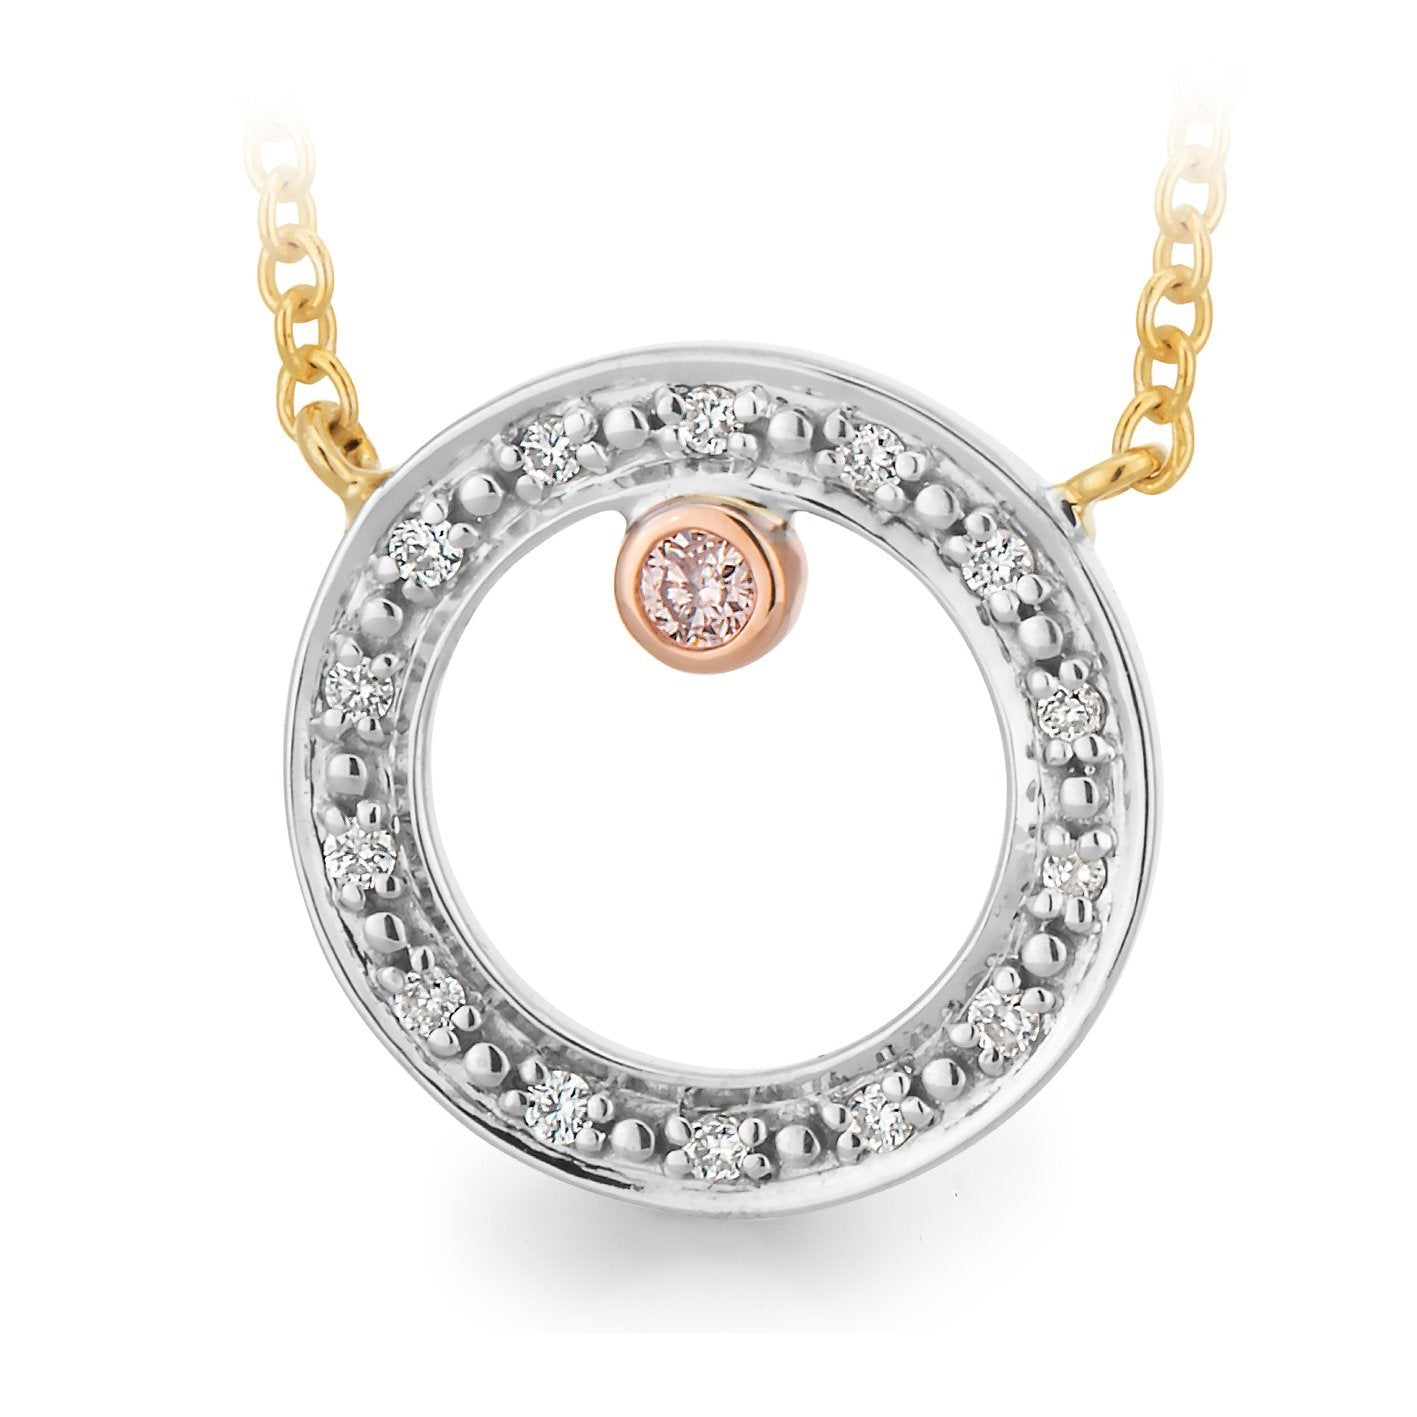 PINK CAVIAR 0.043ct Pink Diamond Necklet Pink Caviar in 9ct White, Yellow & Rose Gold